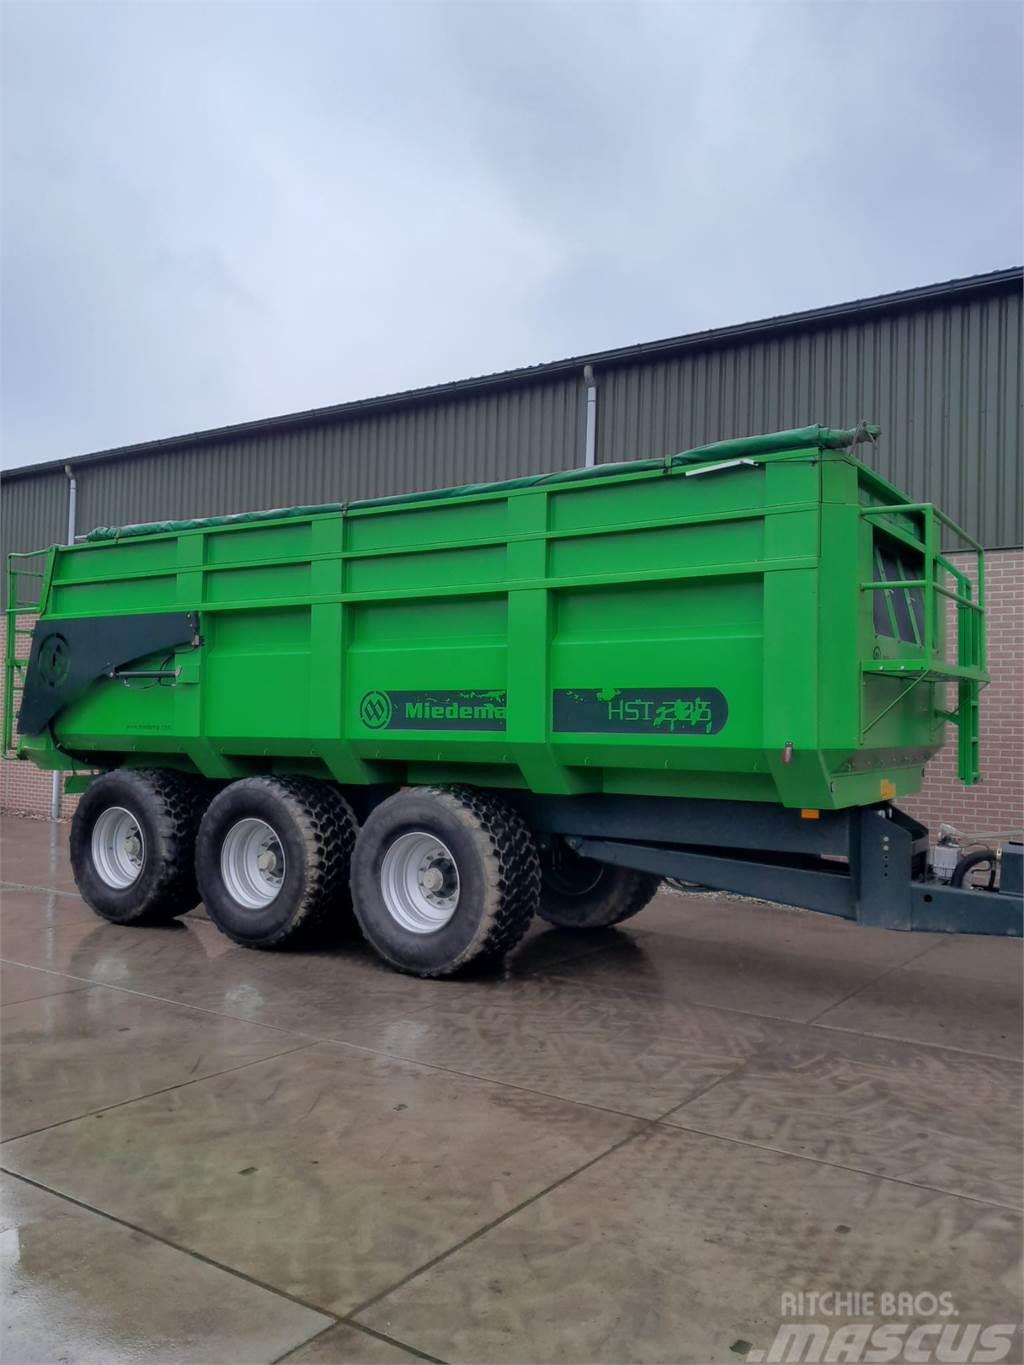 Miedema hst235 Livestock carrying trailers